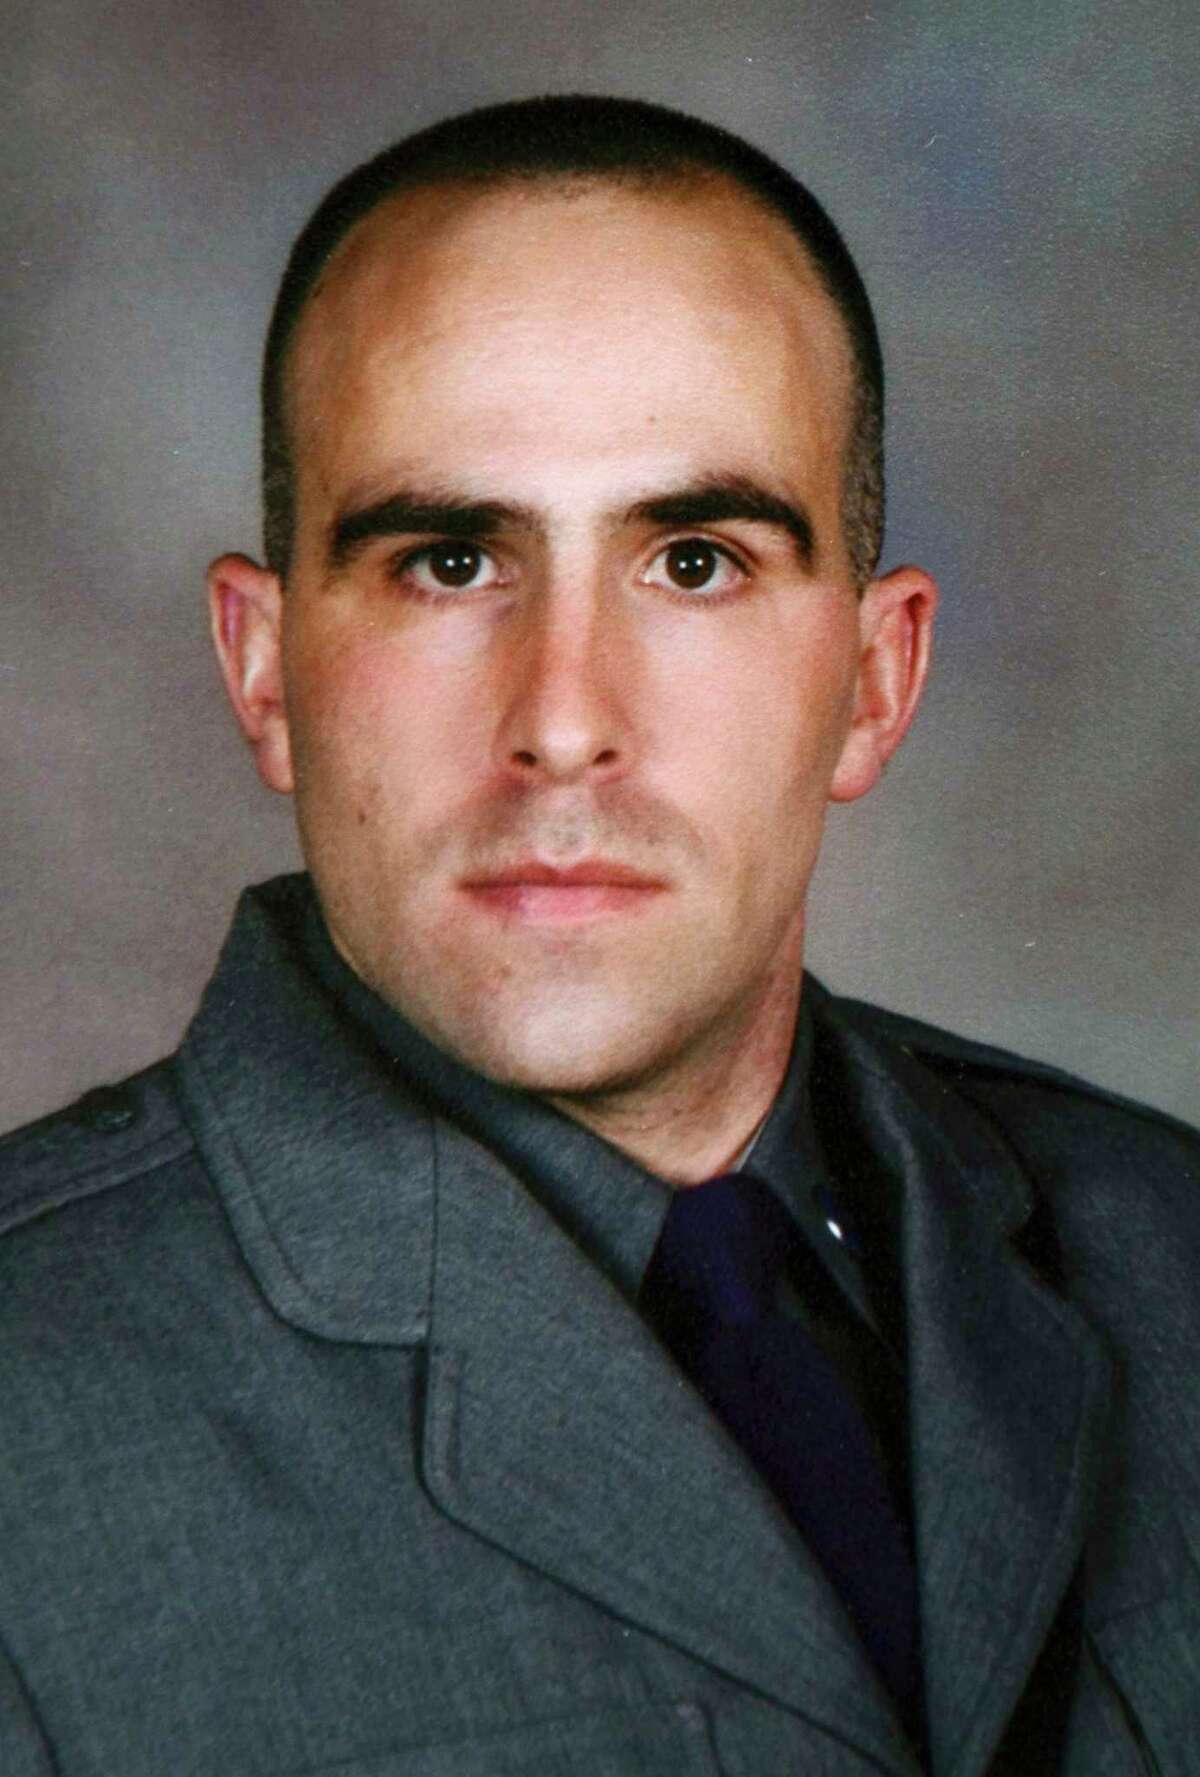 This undated photo provided by the New York State Police shows Trooper Joel Davis, who was fatally shot responding to a domestic dispute in Theresa, N.Y., on Sunday, July 9, 2017. Justin Walters, a U.S. Army soldier, was charged Monday, July 10 with murder in the shooting. (New York State Police via AP)